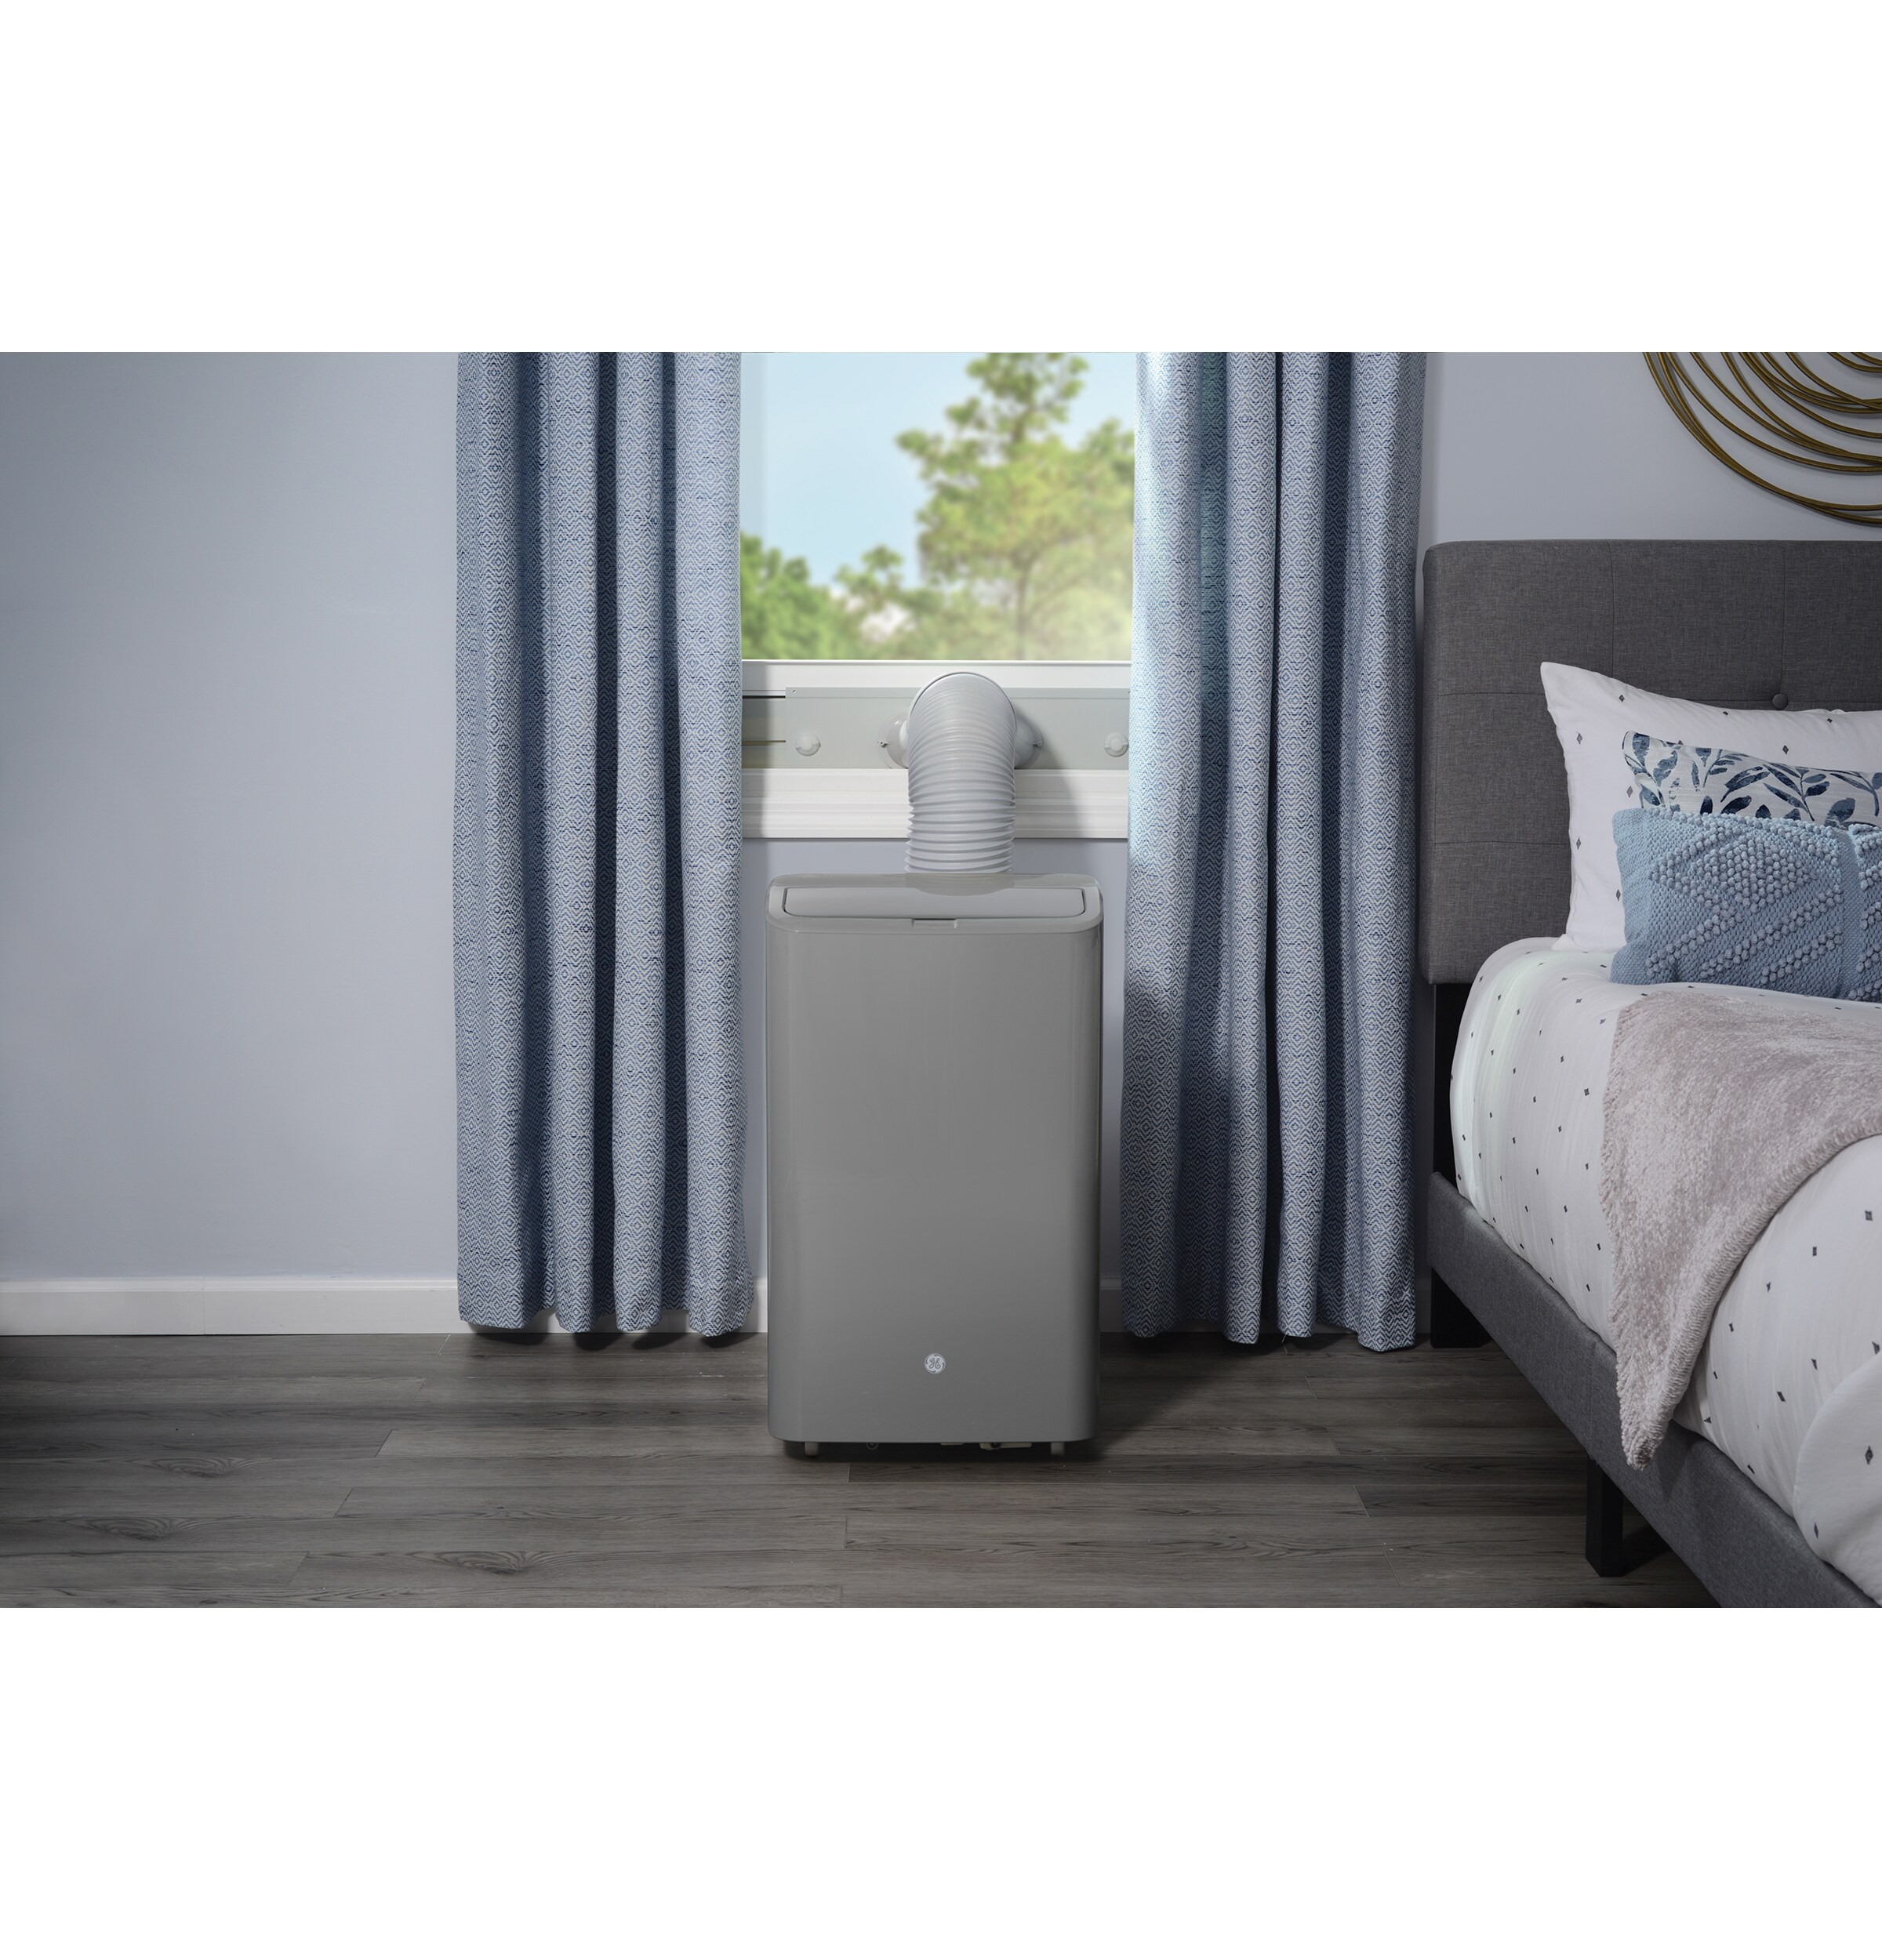 APCD10JASG by General Electric - GE® 10,500 BTU Portable Air Conditioner  with Dehumidifier and Remote, Grey